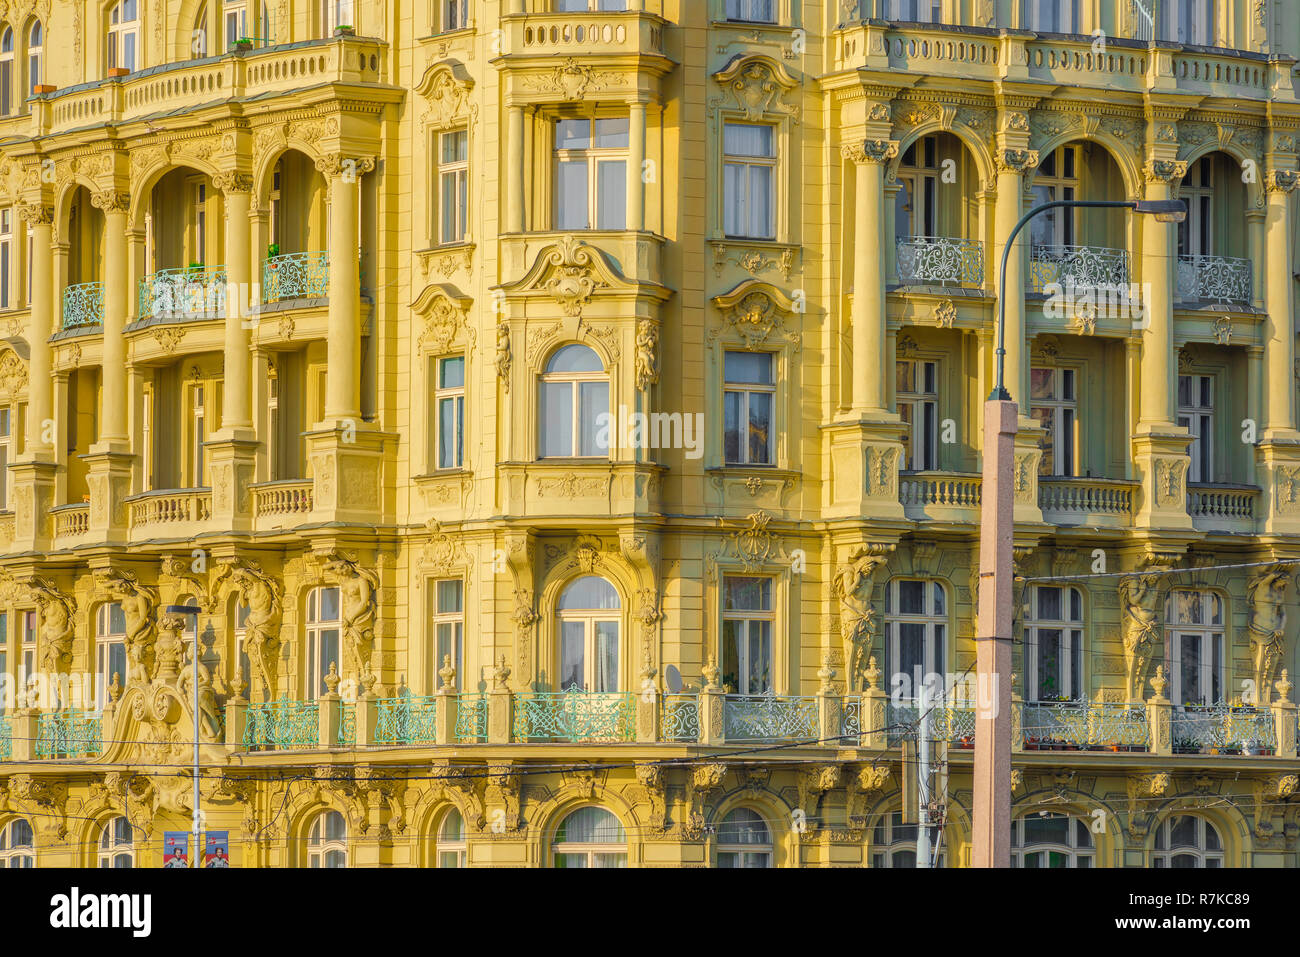 Prague hotel, view of the colorful facade of a typical Art Nouveau hotel building in the Nove Mesto district of Prague, Czech Republic. Stock Photo